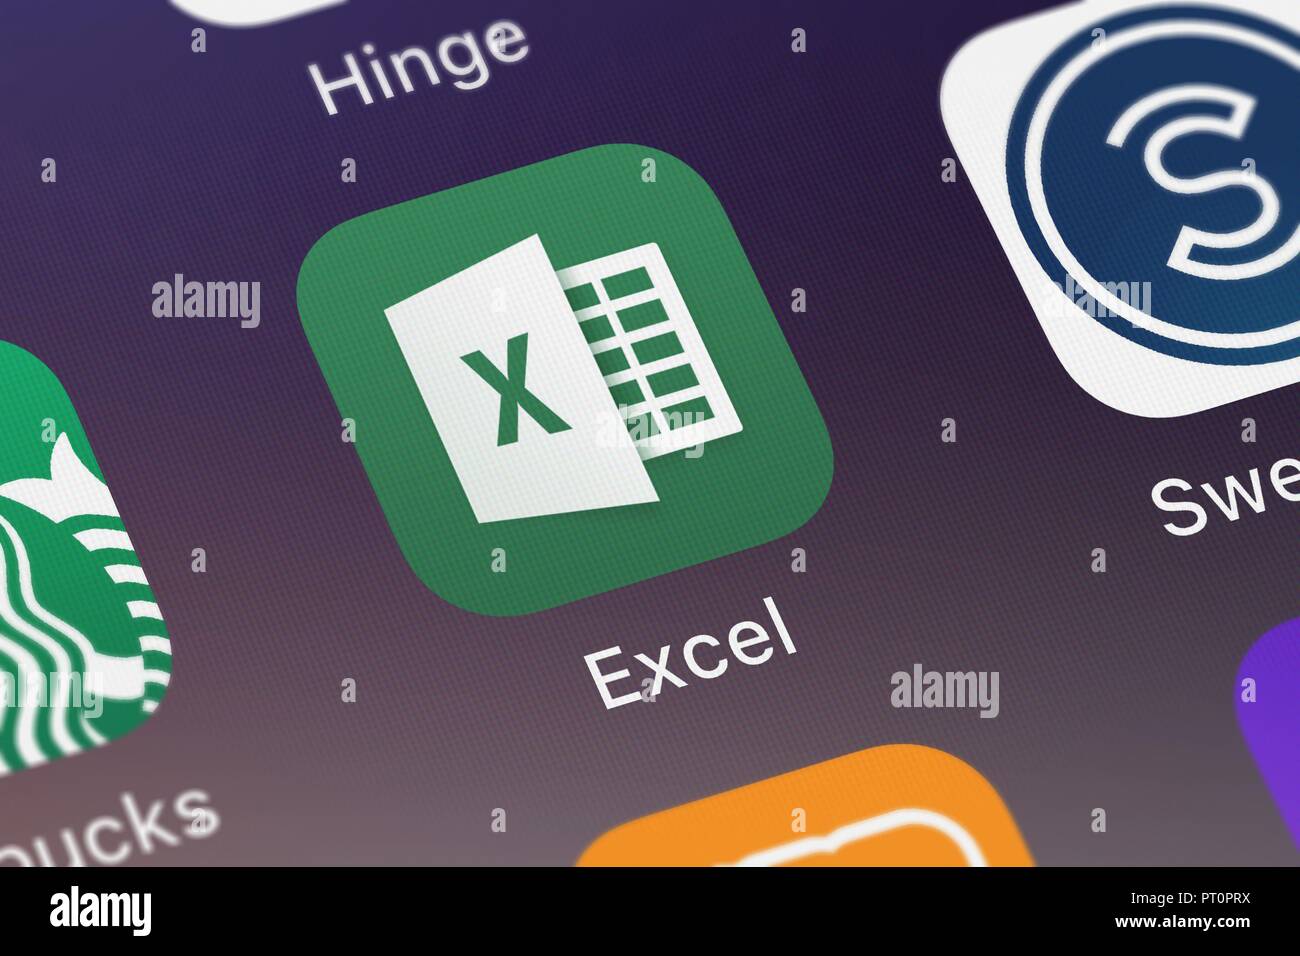 London United Kingdom October 05 2018 Close Up Shot Of The Microsoft Excel Application Icon From Microsoft Corporation On An Iphone Stock Photo Alamy